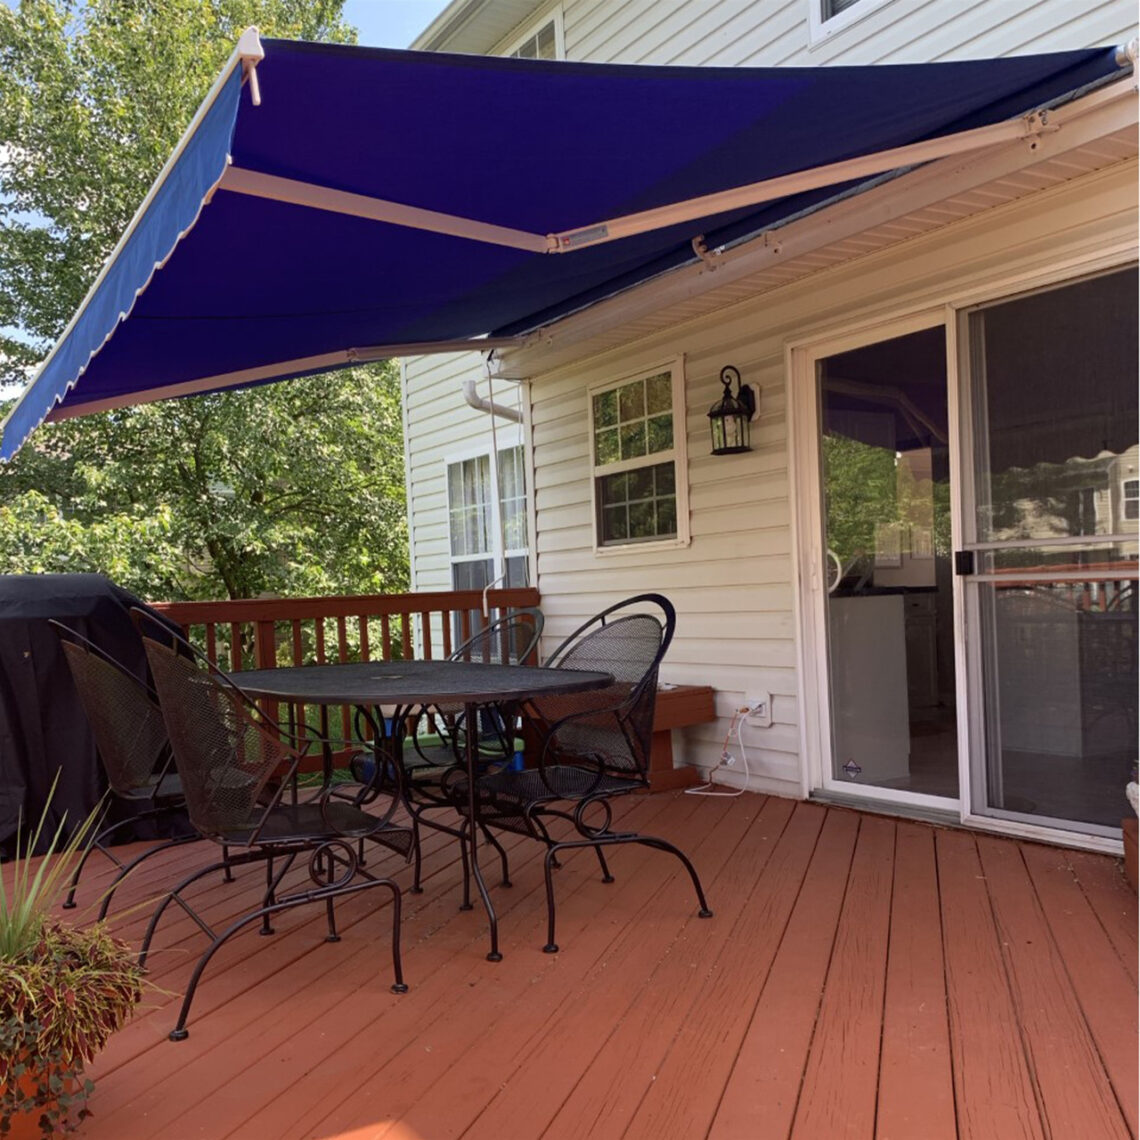 How to Replace Fabric On An Electric Awning: A Simple Guide